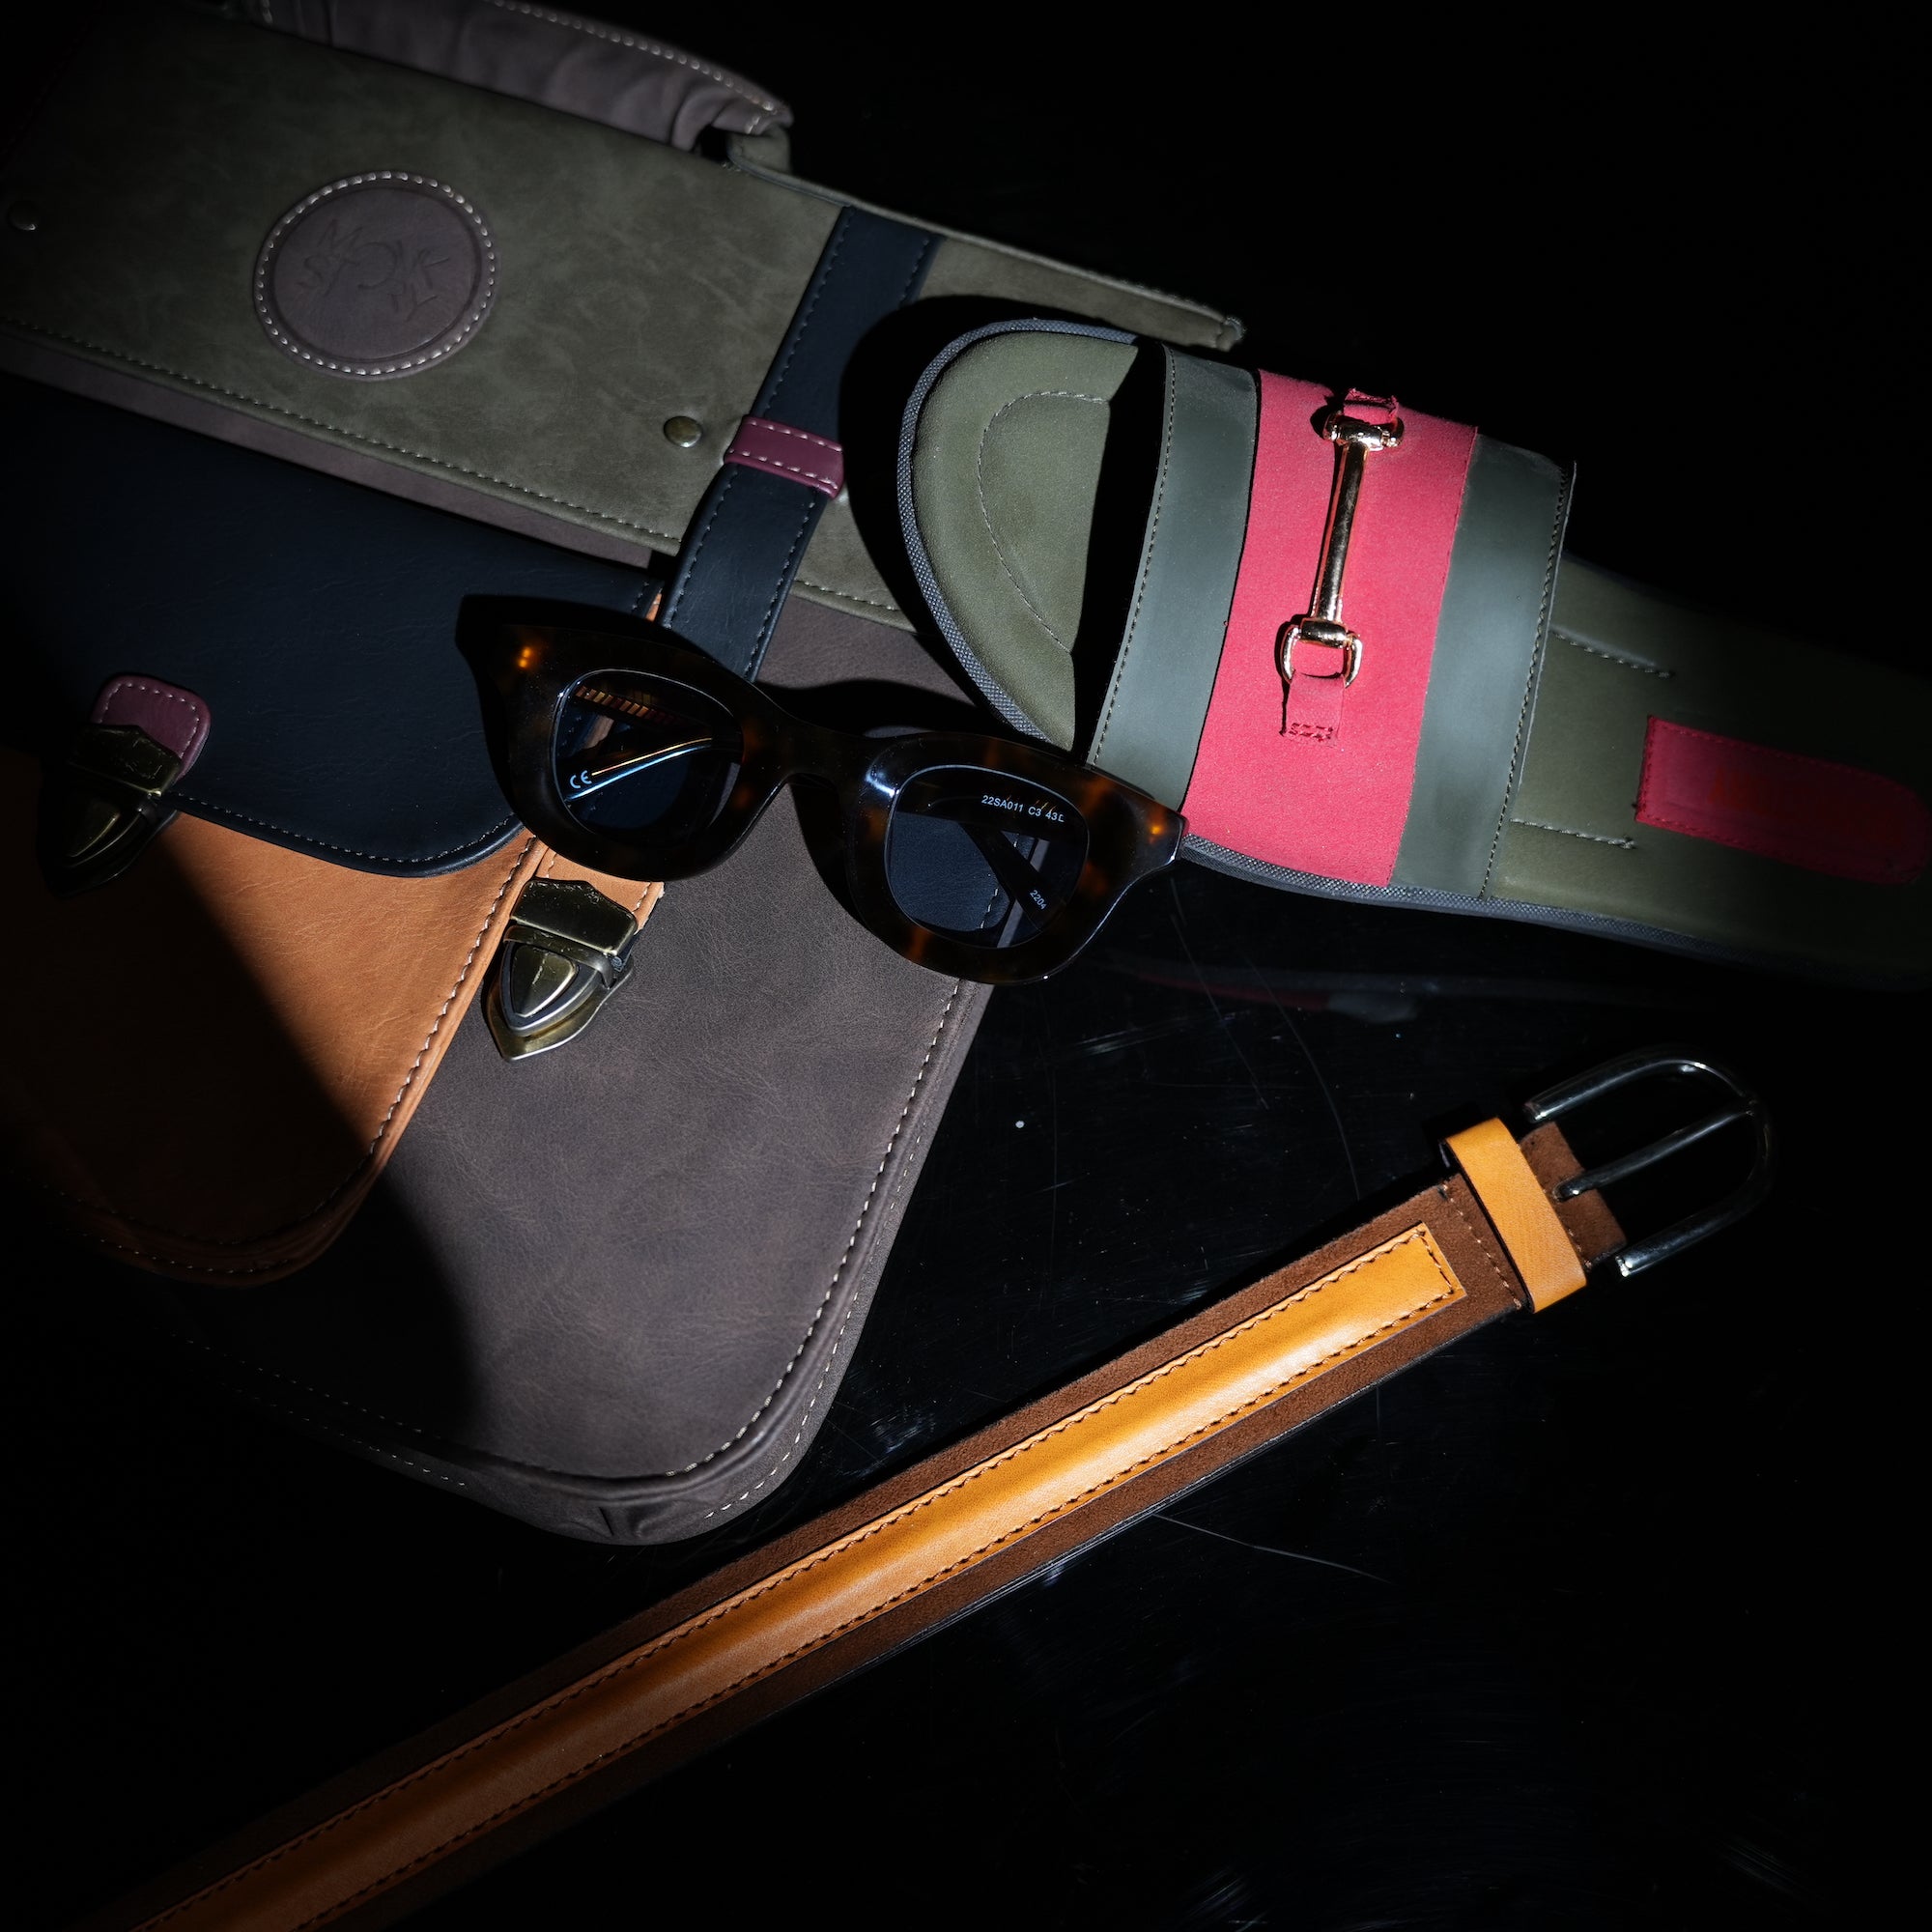 A bag, sunglasses, and a belt are laying on a dark surface.